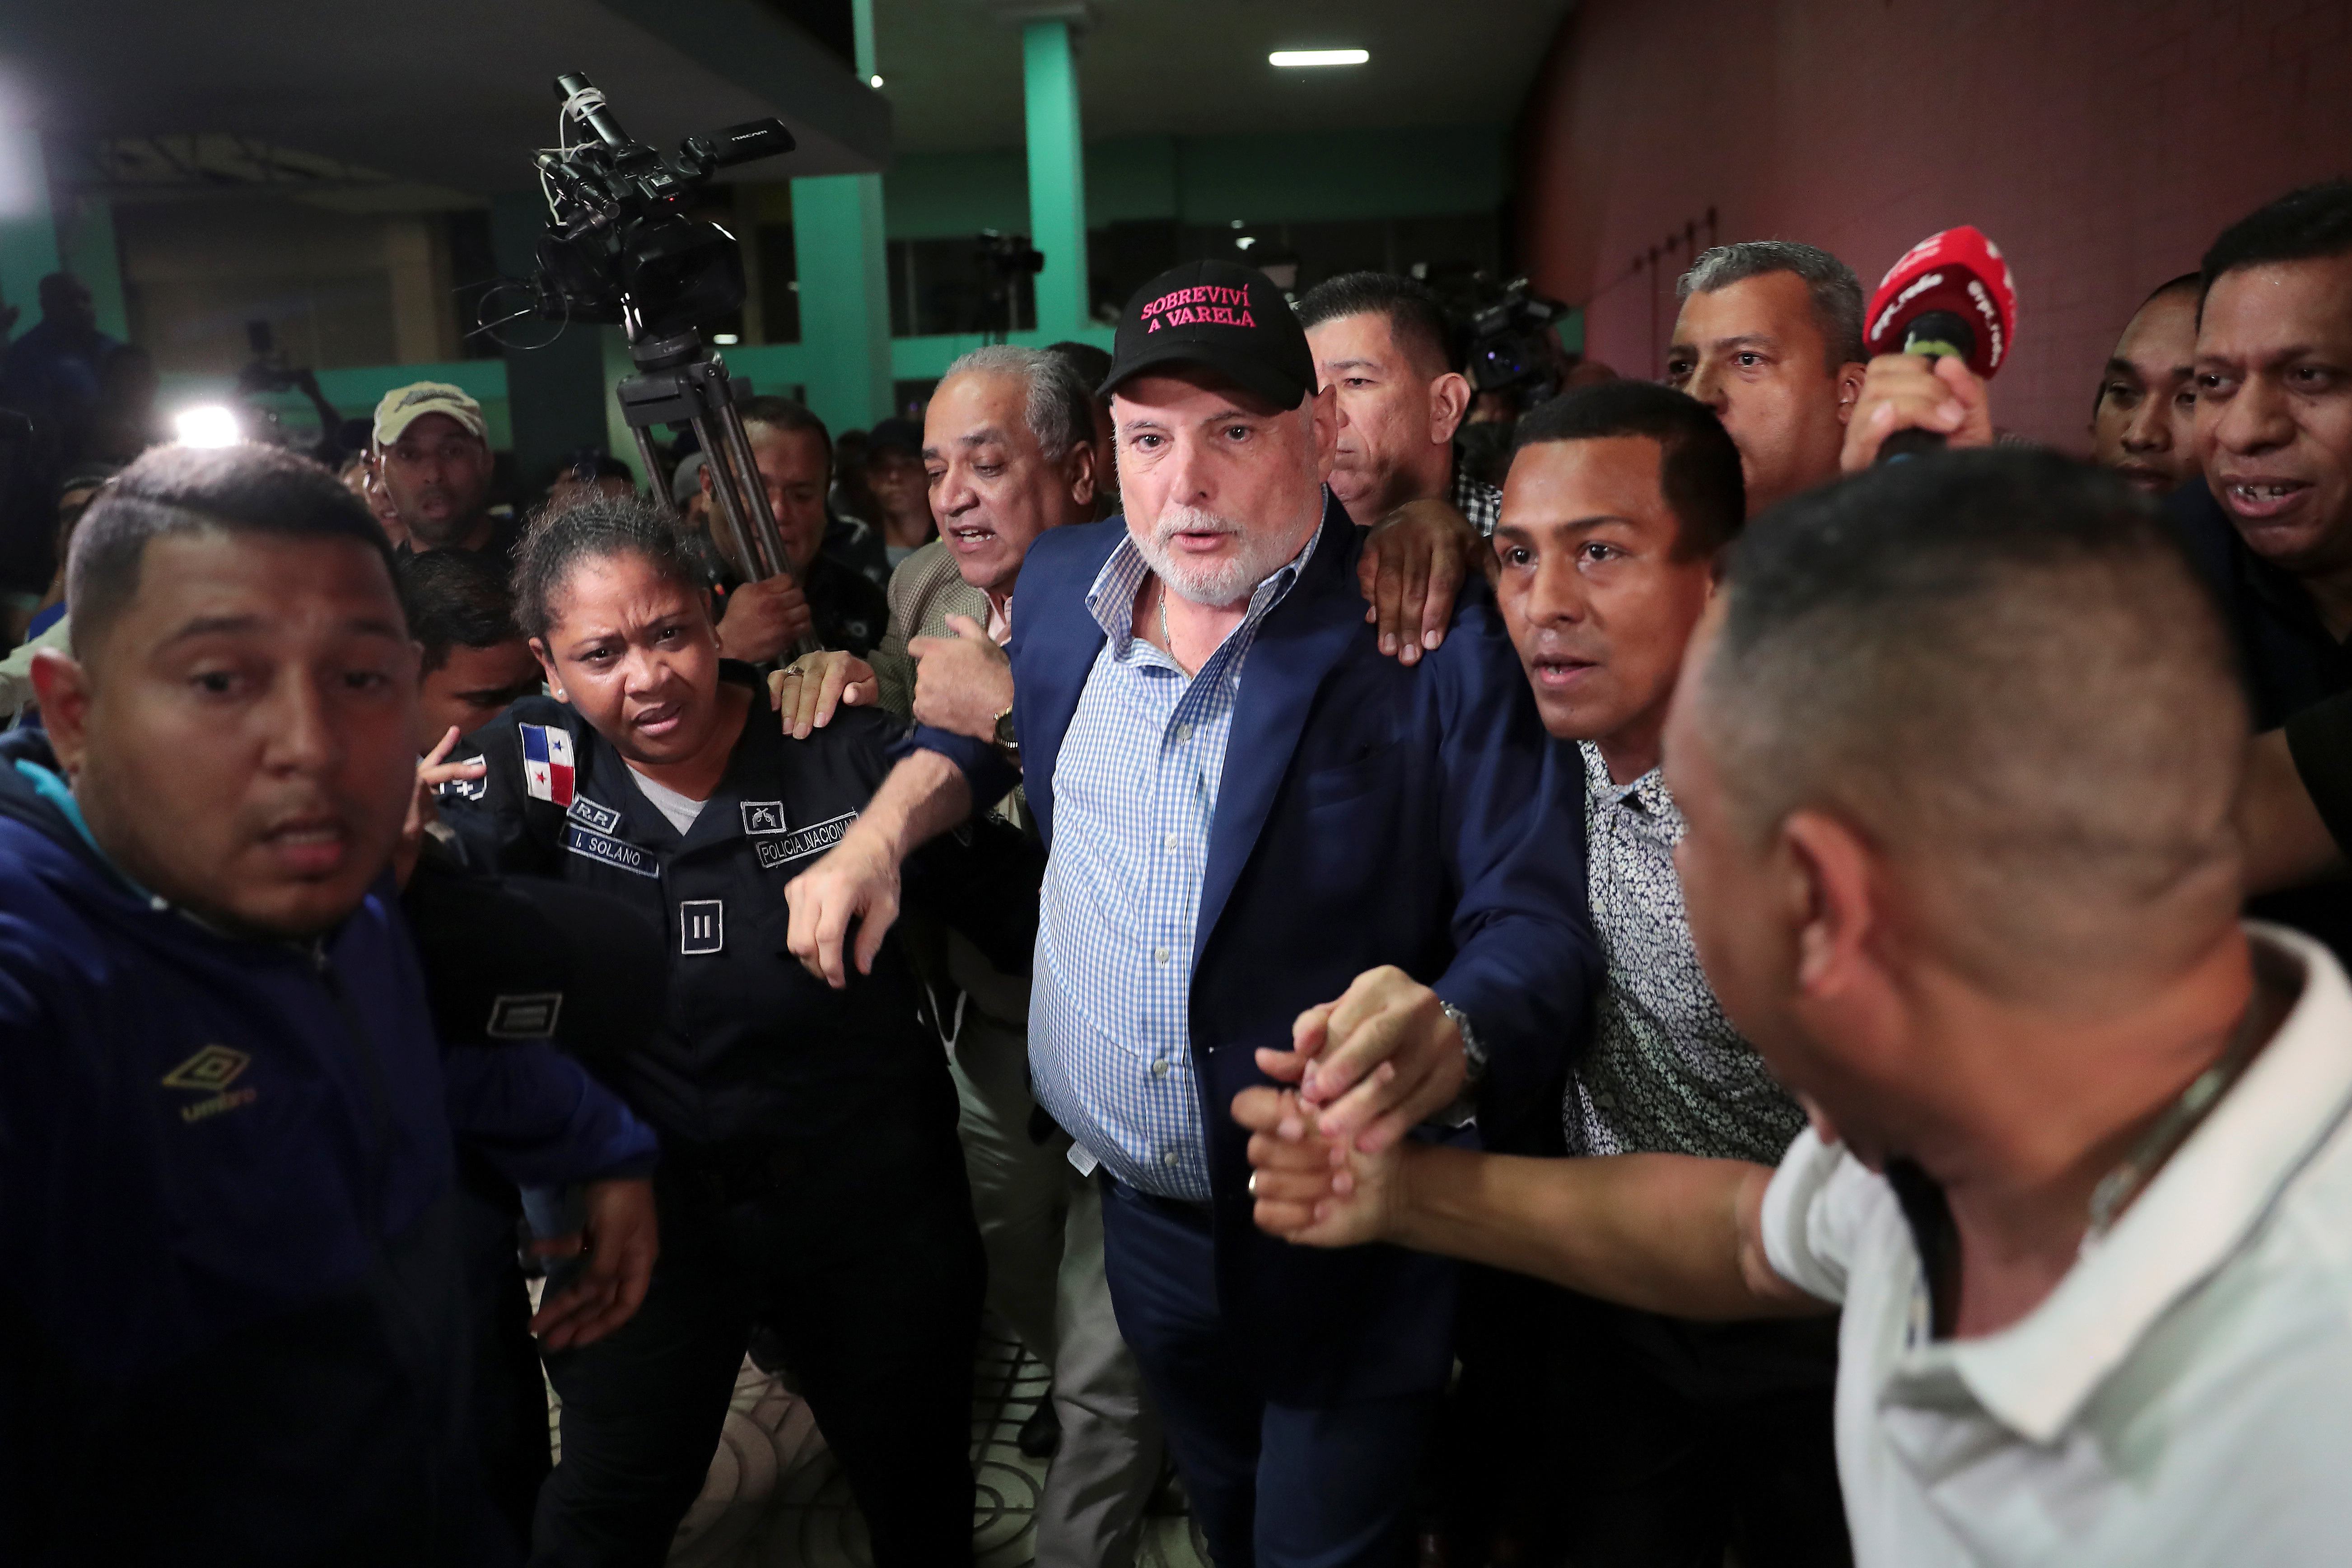 Panama's former president Ricardo Martinelli is escorted by police officers and supporters while leaving a courthouse after being declared not guilty of spying charges in Panama City